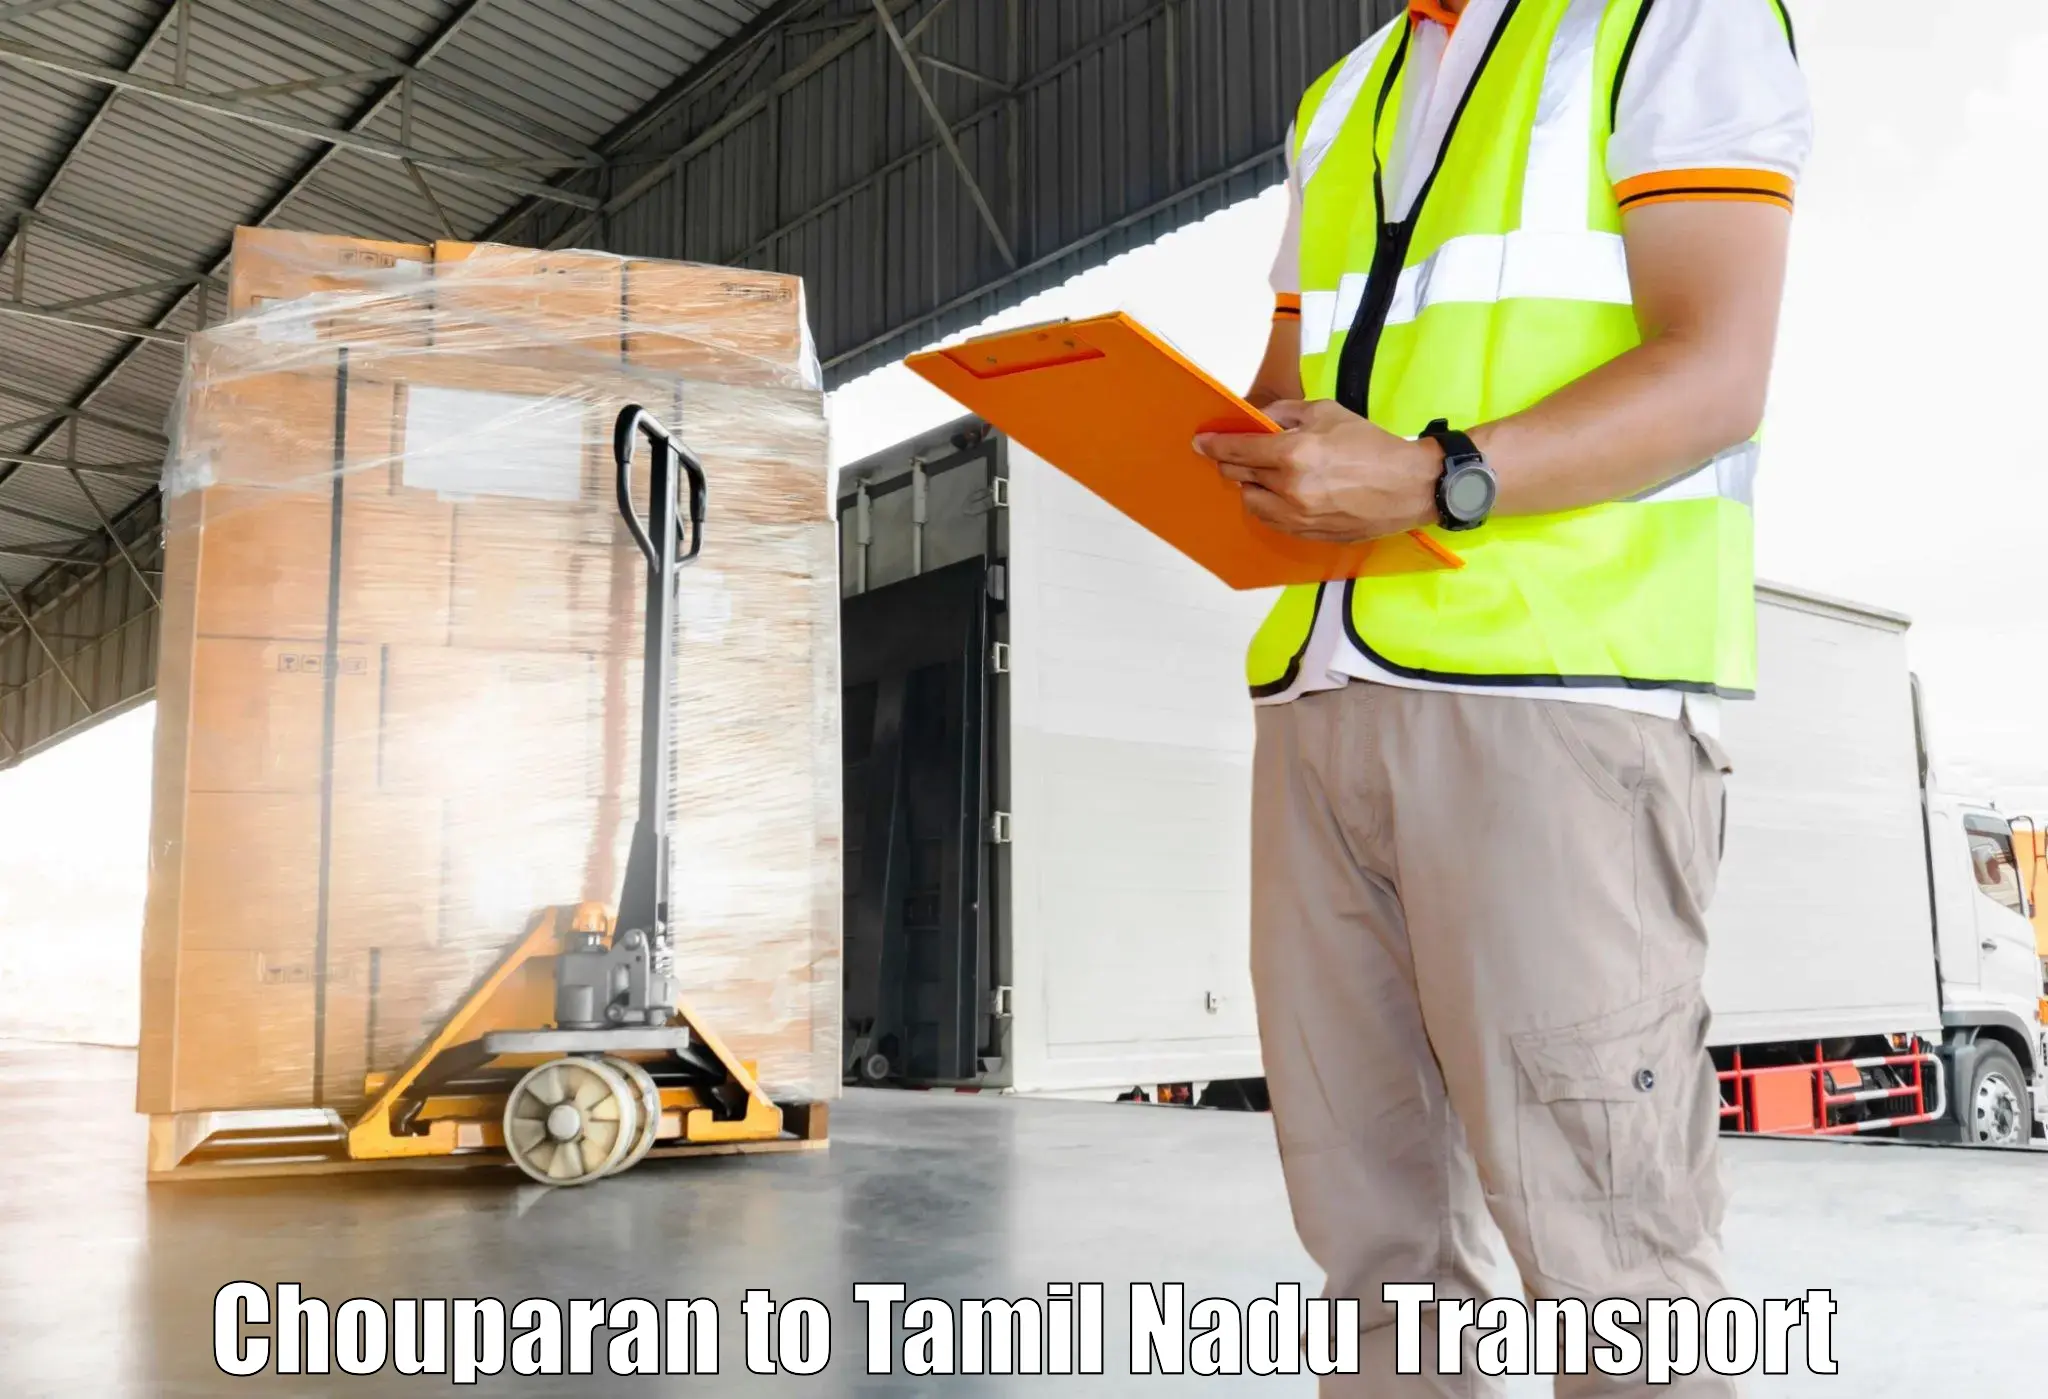 Road transport online services Chouparan to Erode